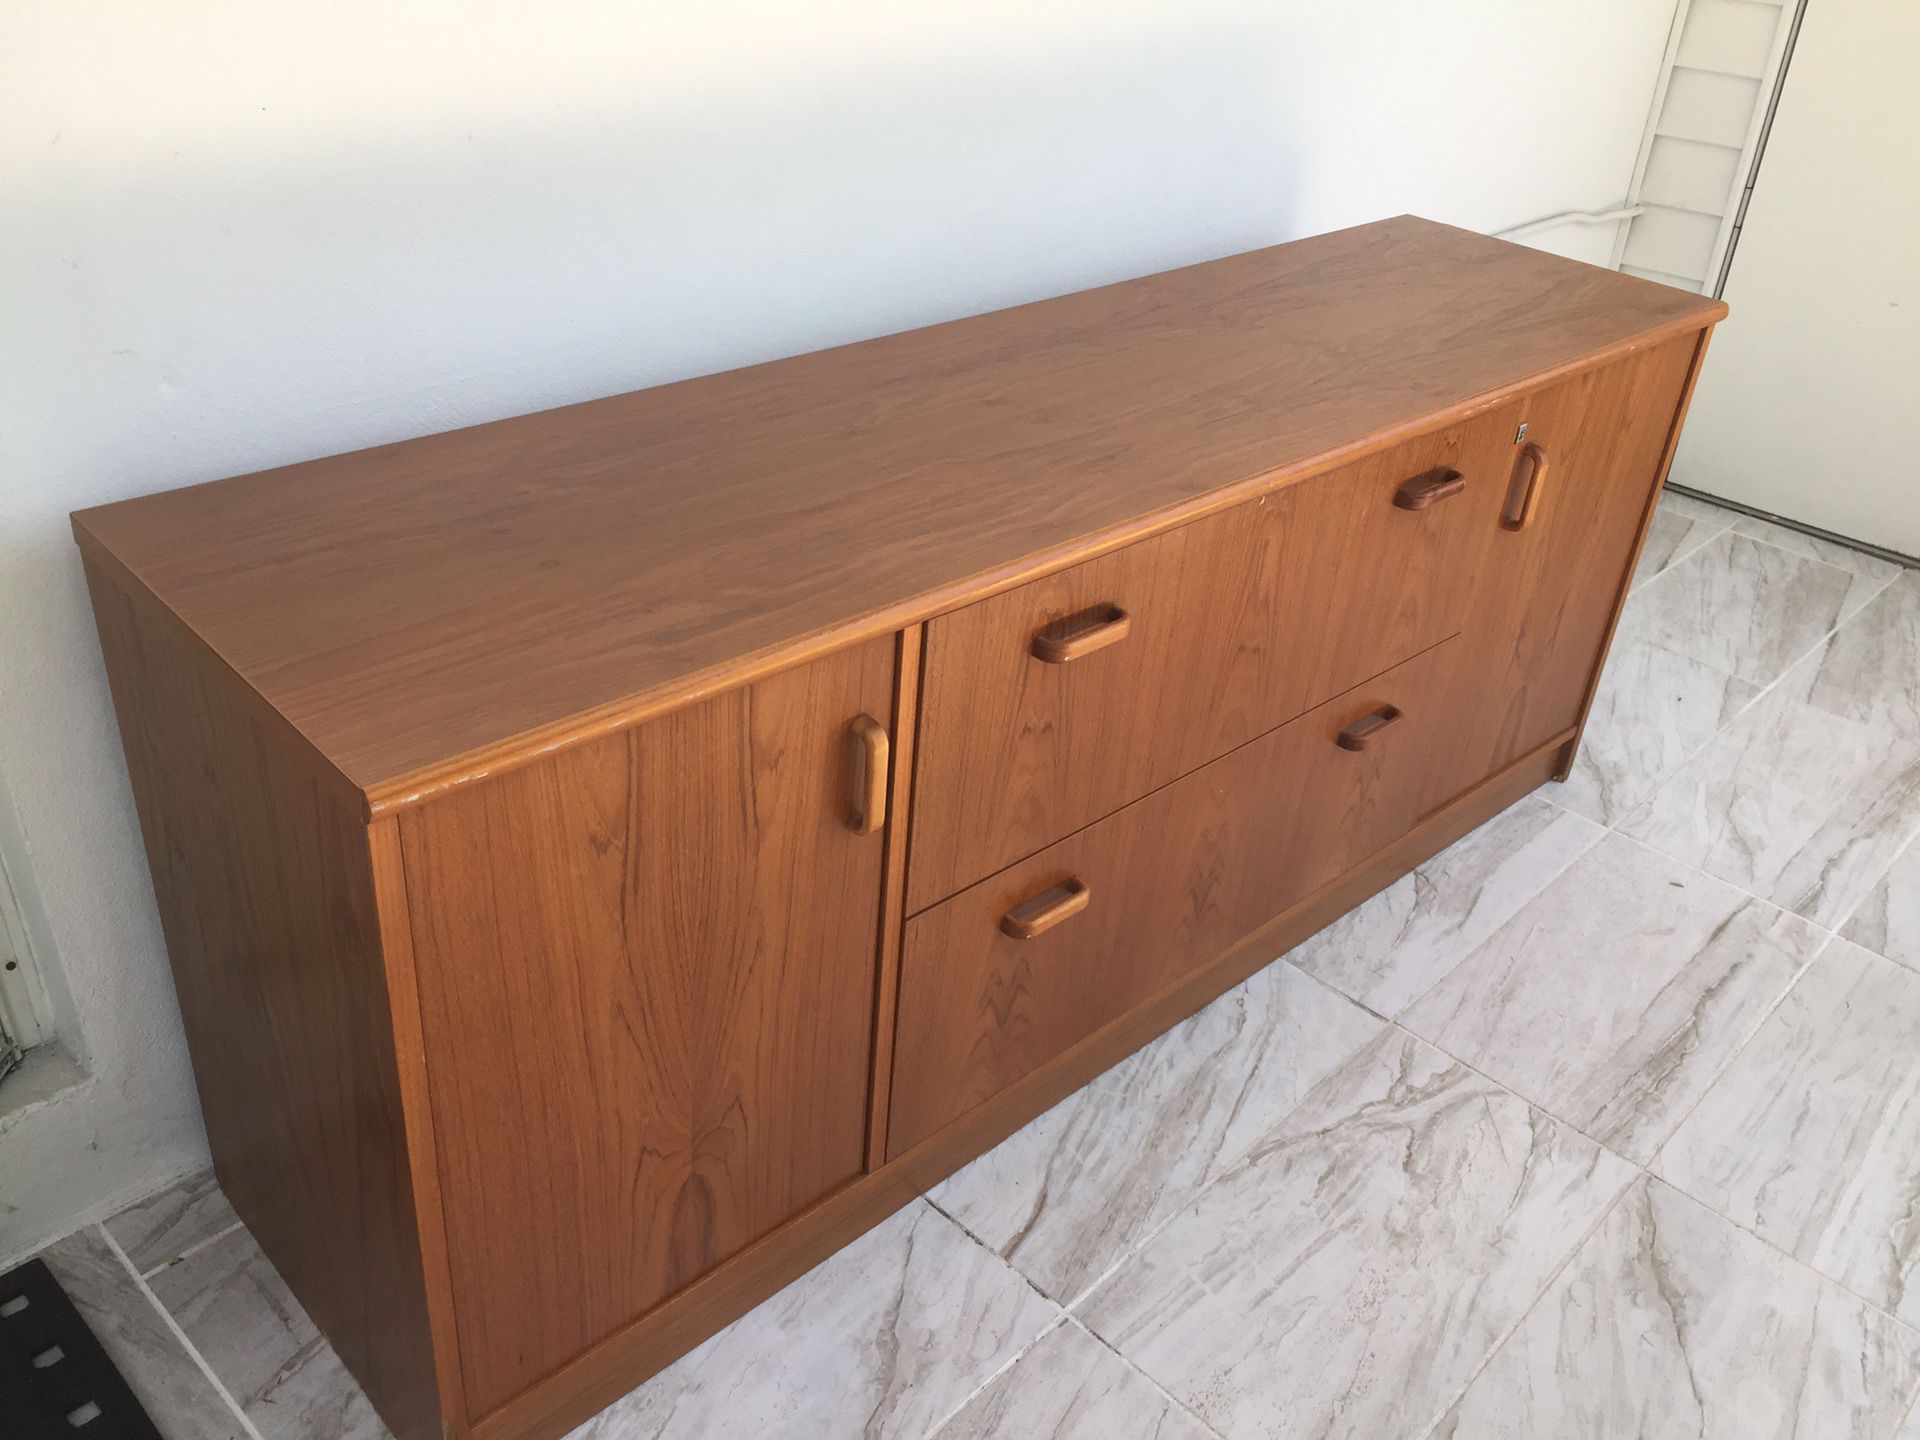 Credenza, large piece of furniture, very useful. Two deep drawers, can be used as a file cabinet. Two large side cabinets with shelves. Little damage